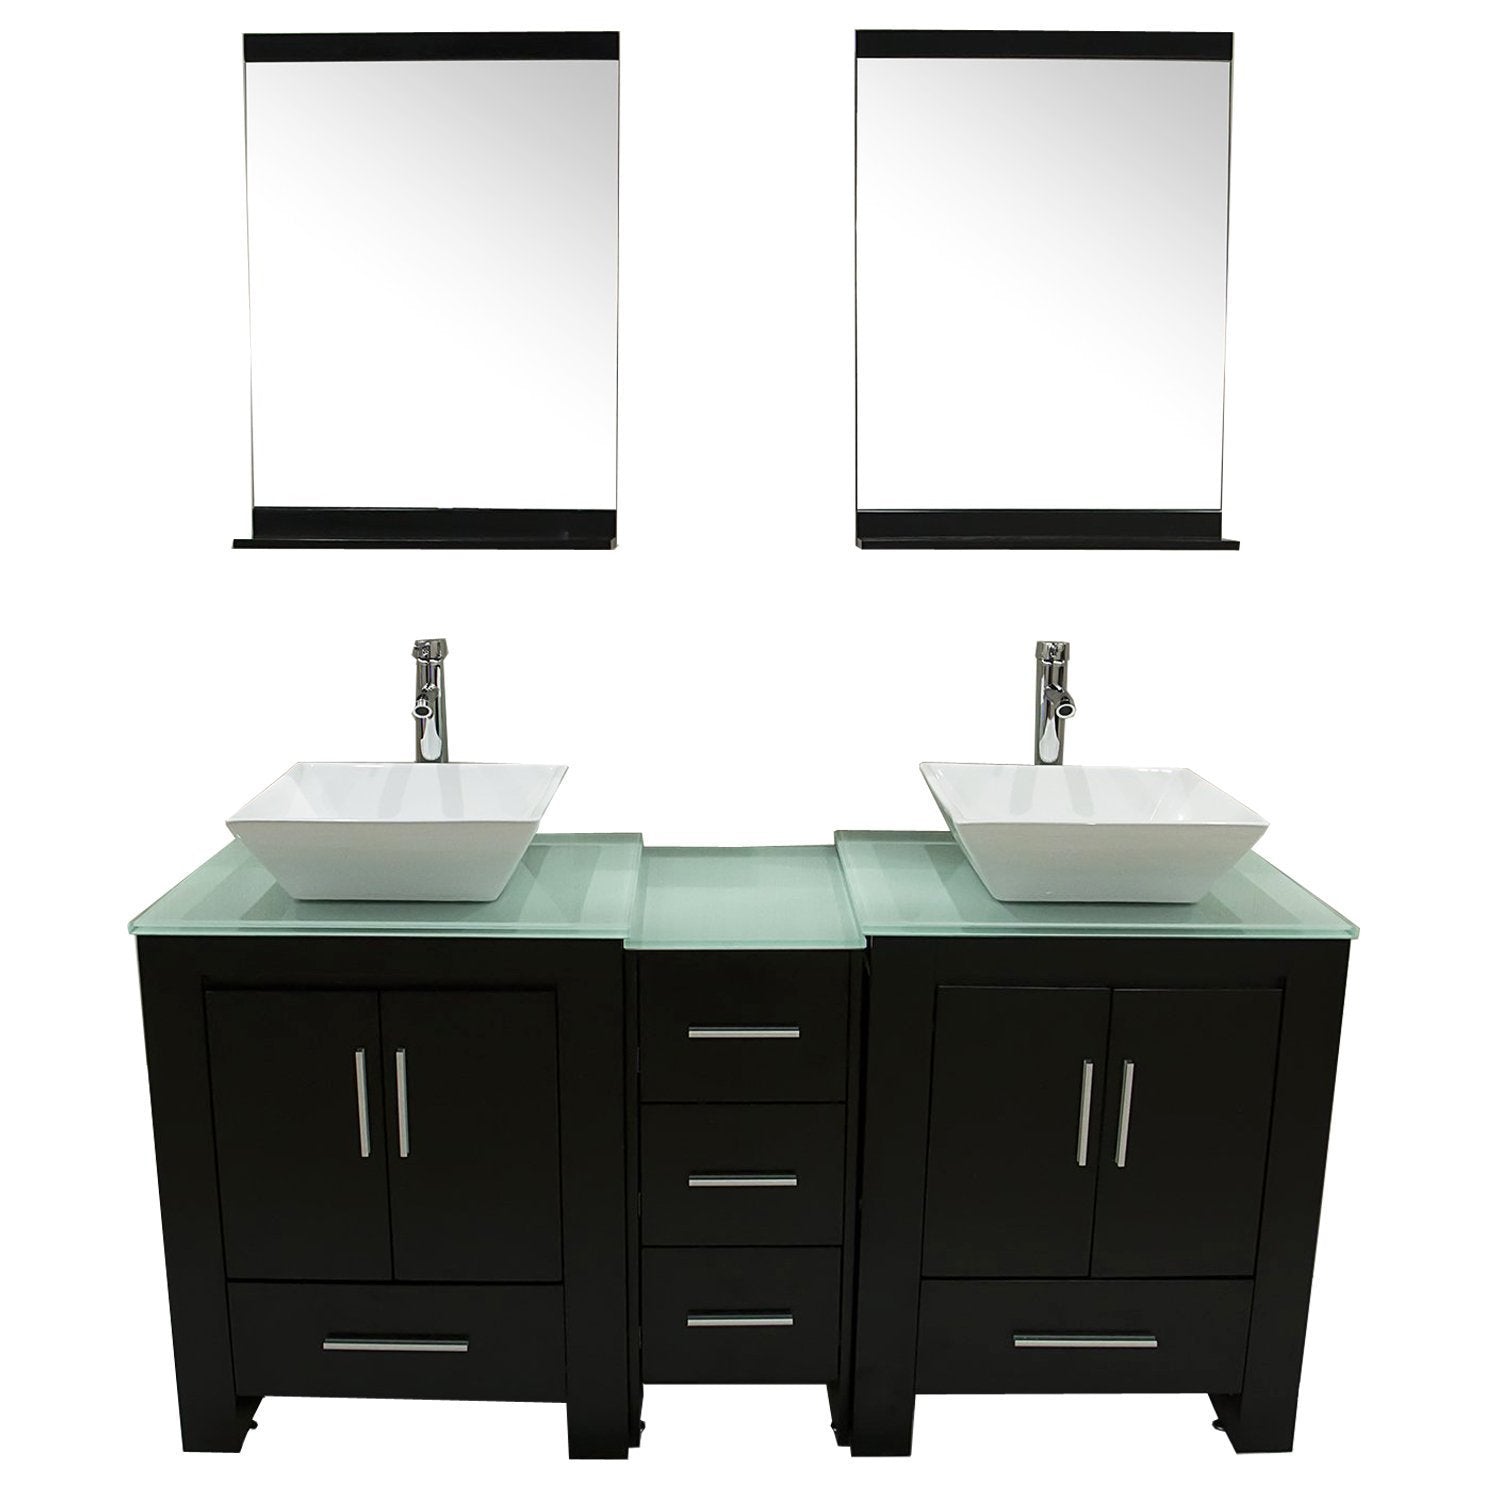 Walcut 60" Double Black Wood Bathroom Vanity with 2 Trapeziform Ceramic Vessel Sink, Faucet Combo w/ 2 free Mirror, Tempered Glass Table Board